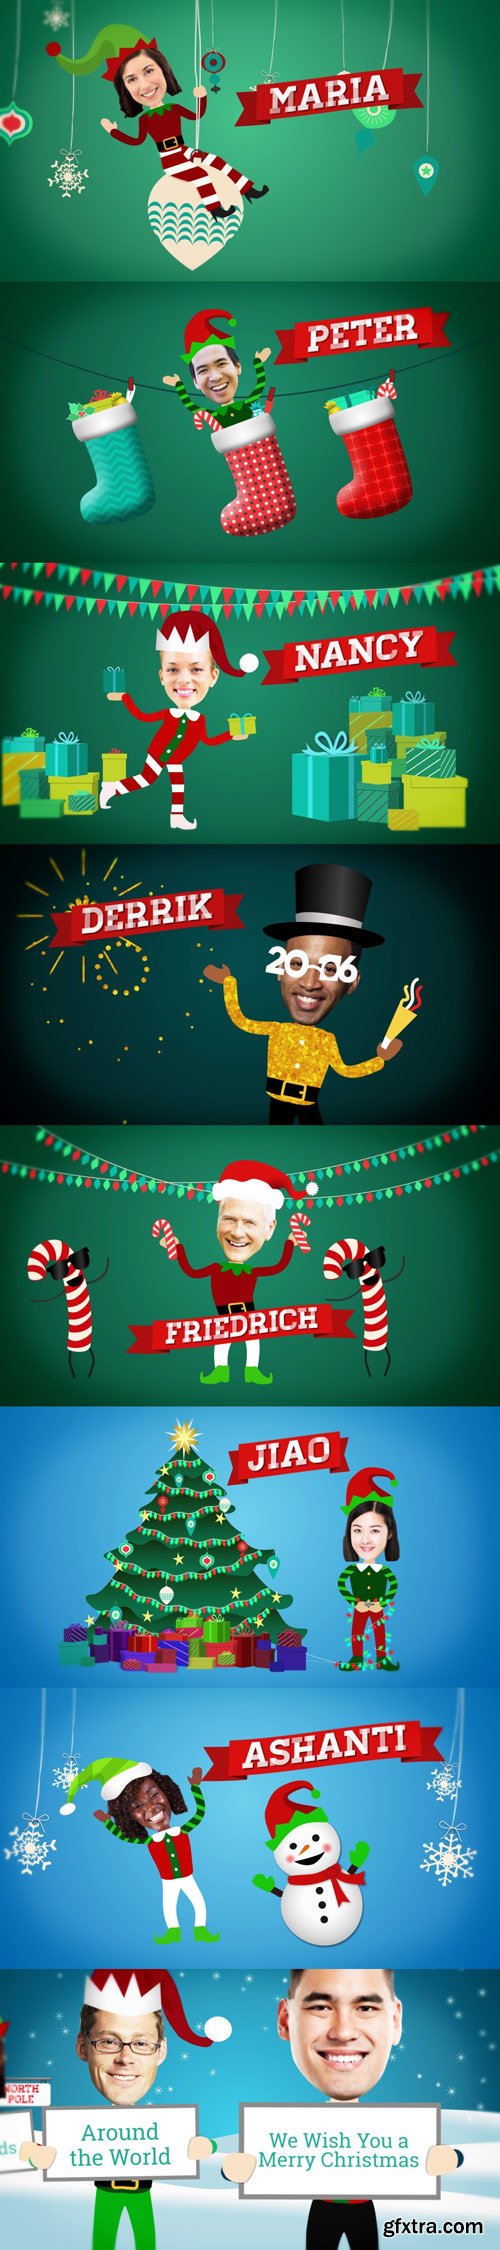 FluxVfx - Christmas Elves Greetings After Effects Template